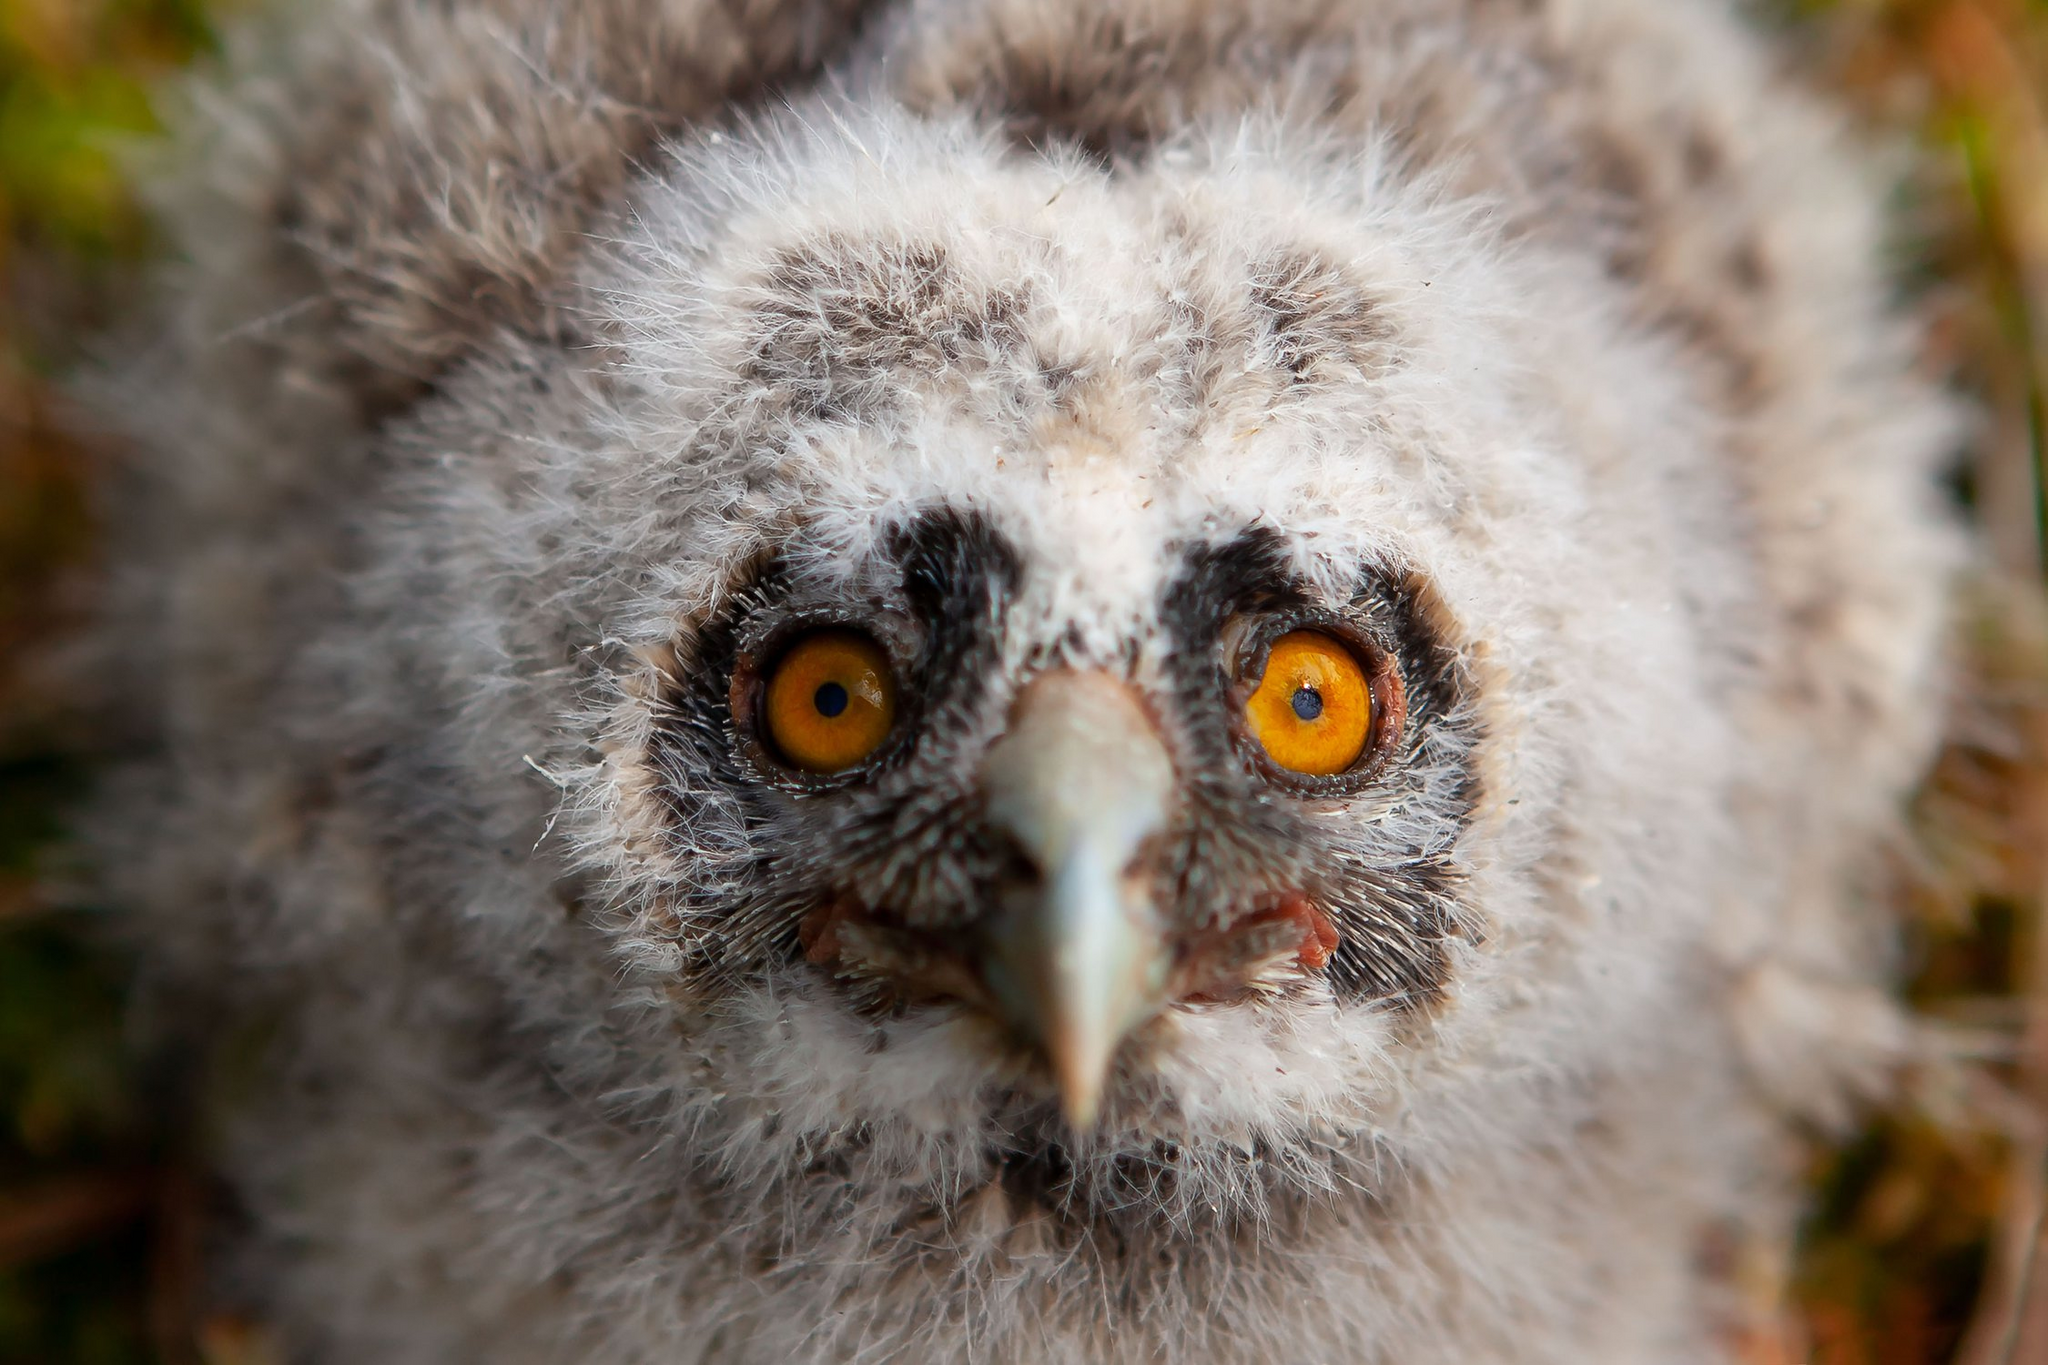 Care is not always obvious - Eared, Owl, Owls, Predator birds, Ringing, Accounting, wildlife, Republic of Belarus, Birds, The national geographic, The photo, Milota, Longpost, Chick